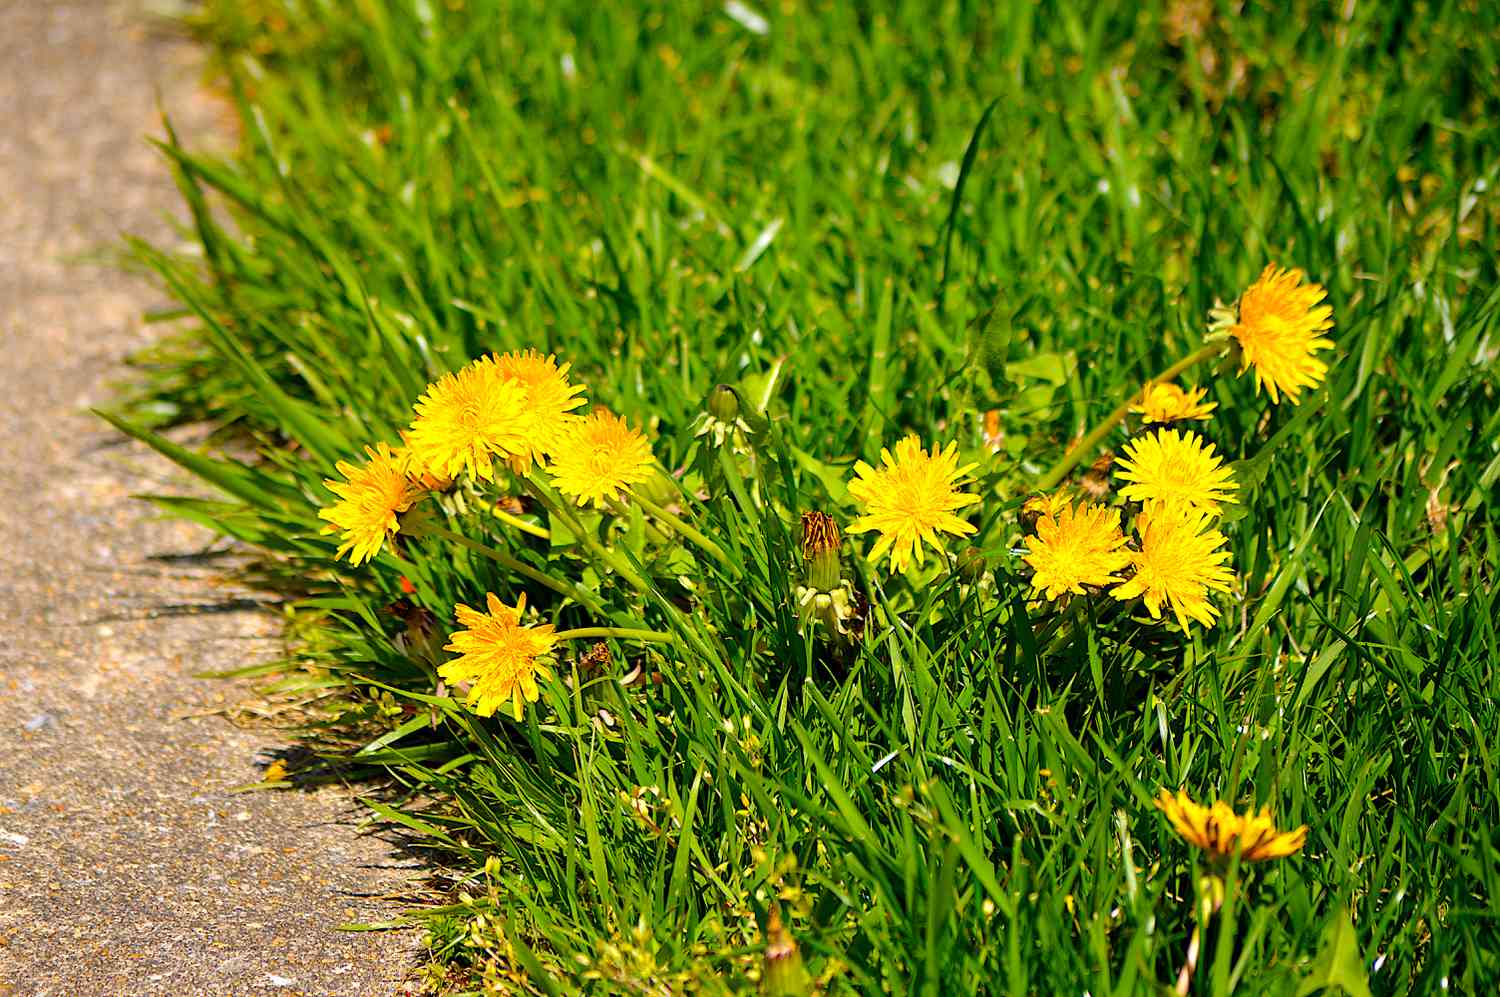 How To Kill Dandelions But Not Grass